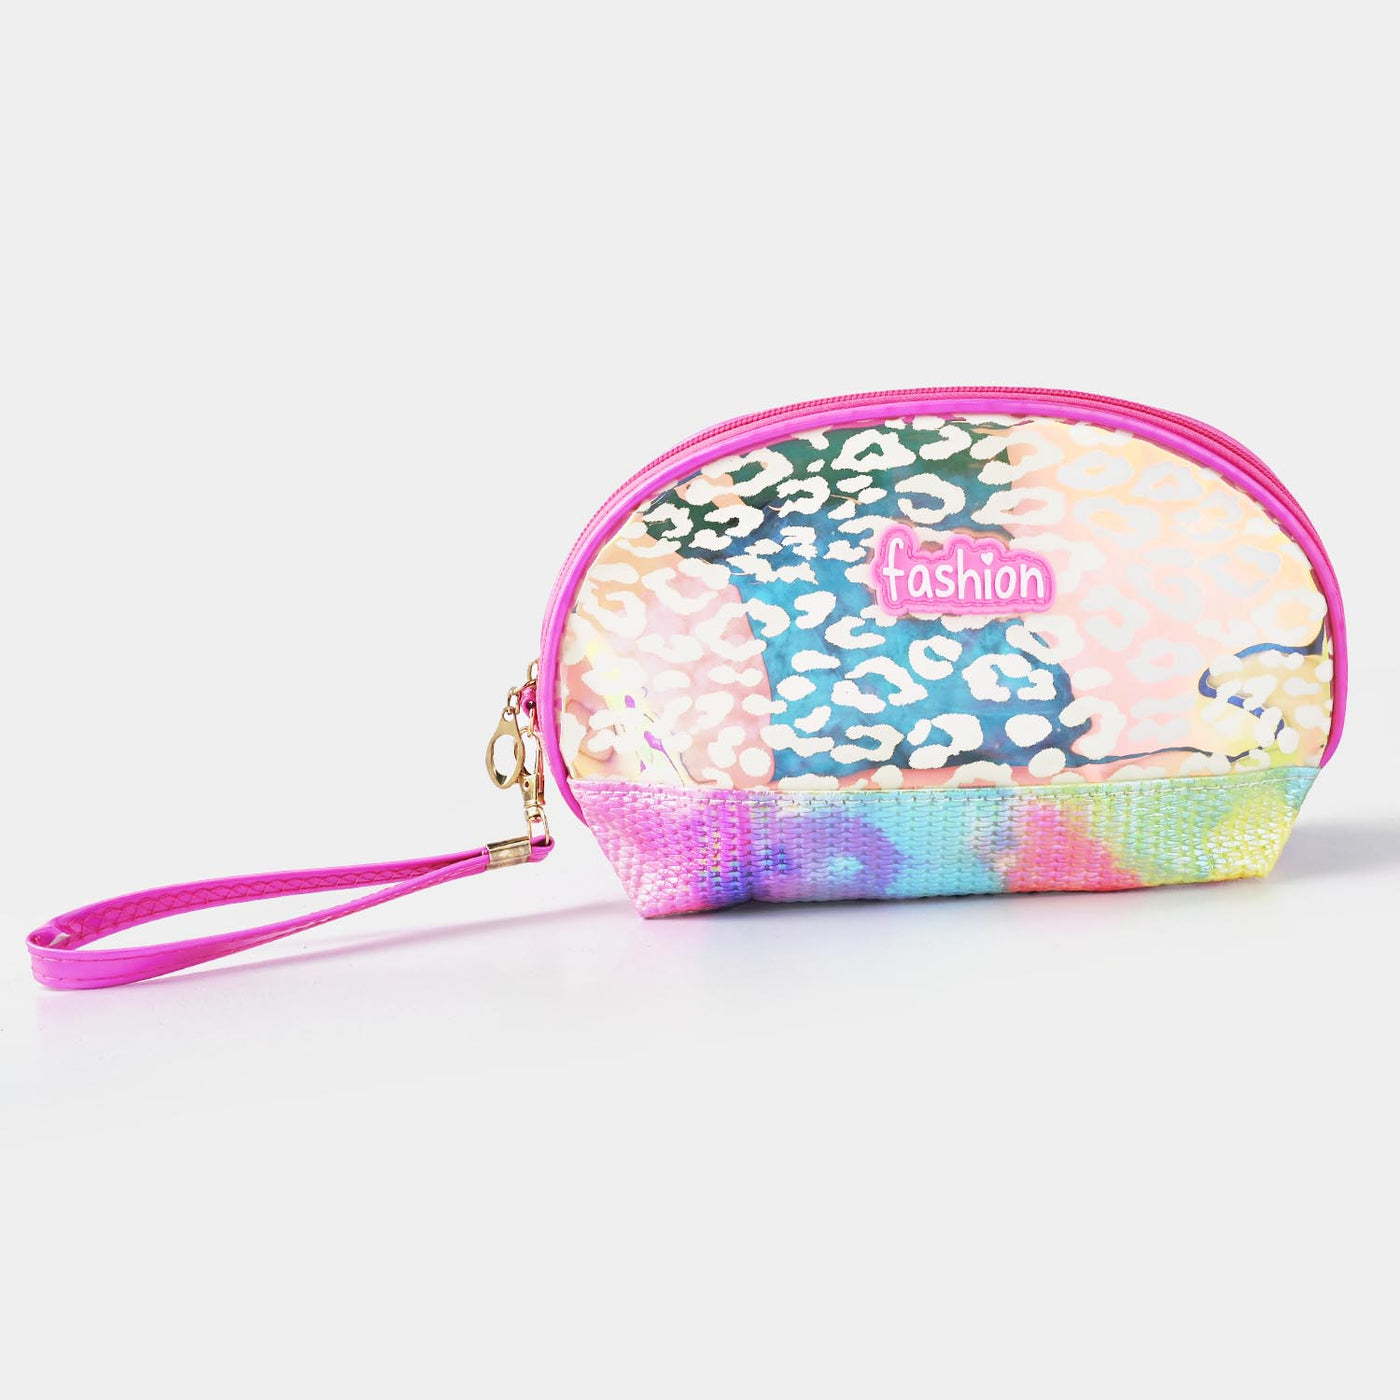 Cute & Stylish Hand Pouch For Girls